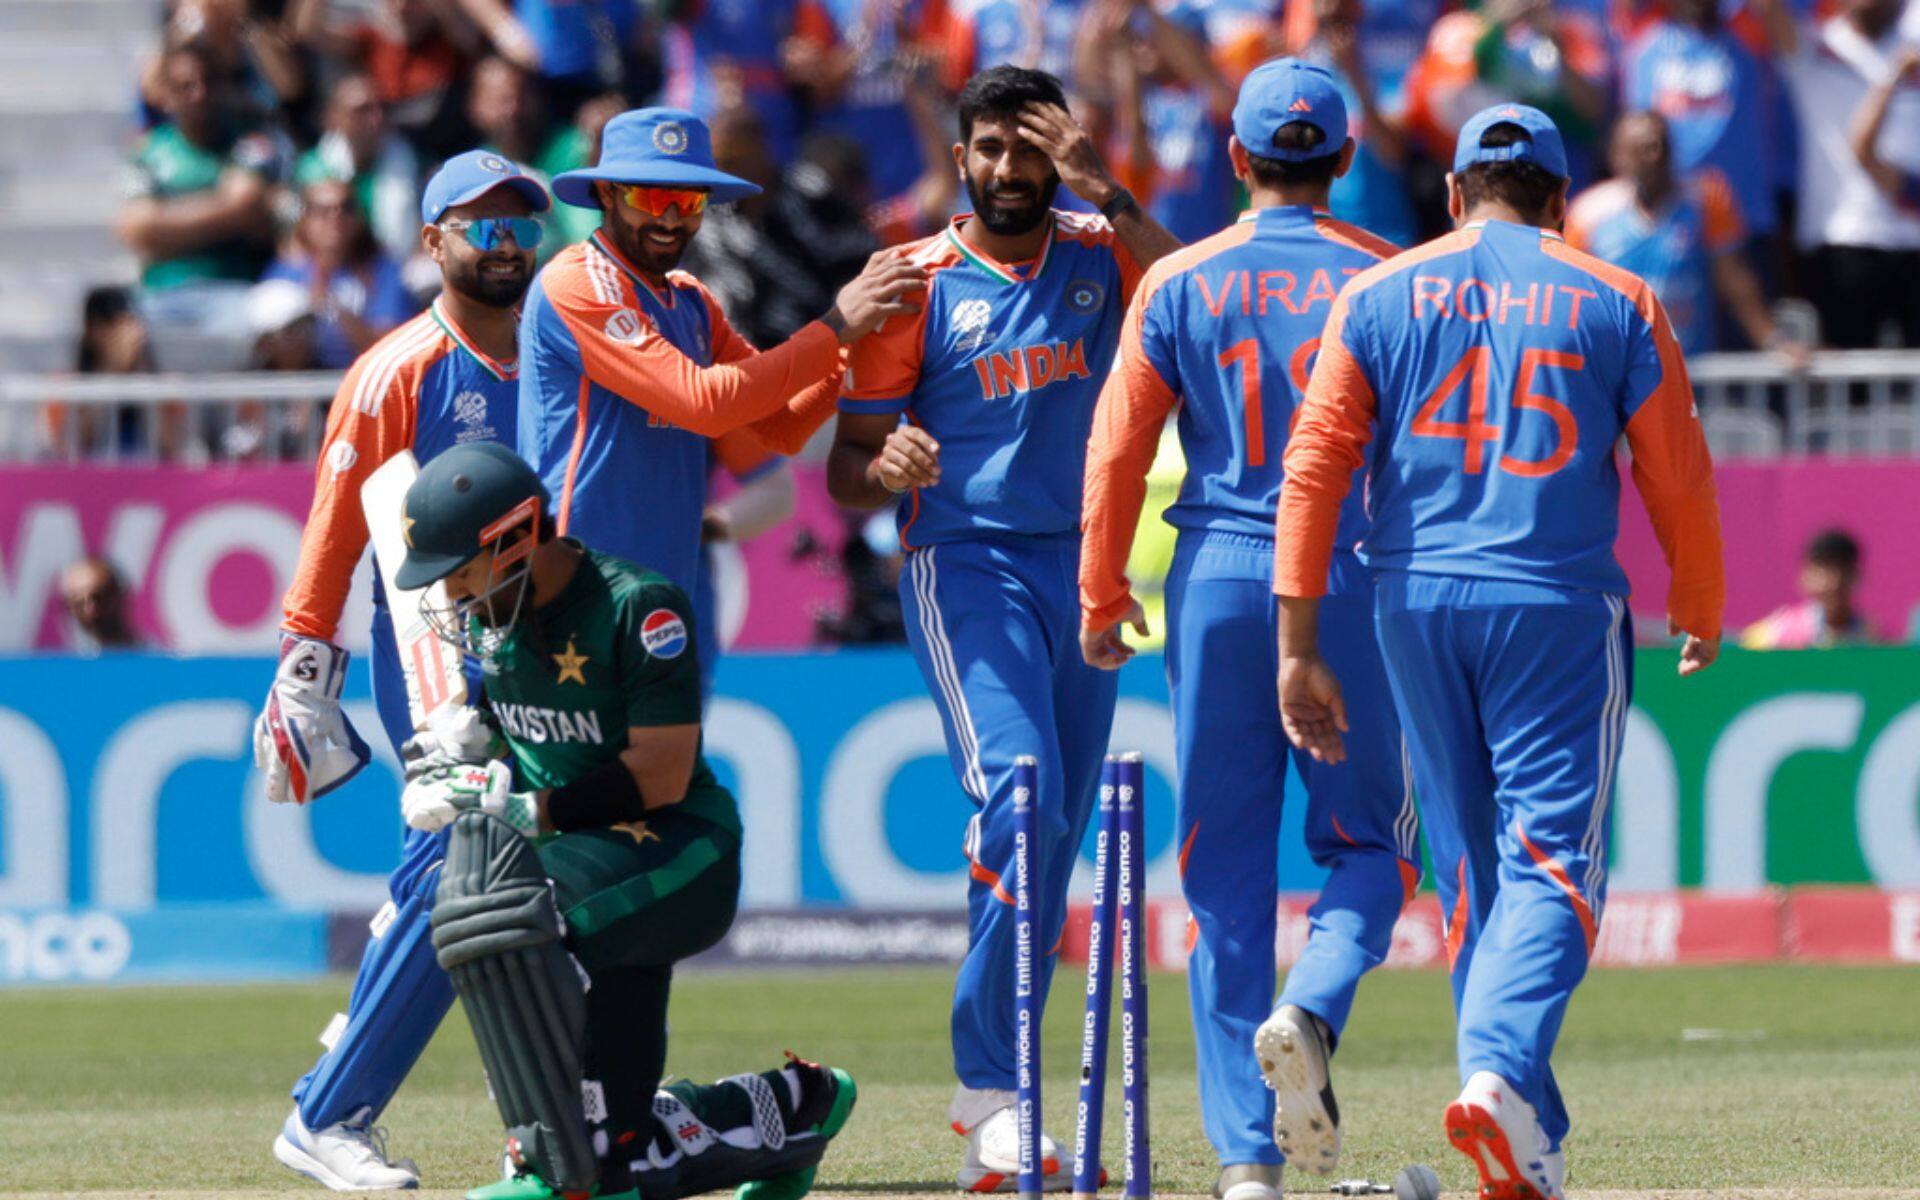 Pakistan were shattered after loss against India (AP Photo)